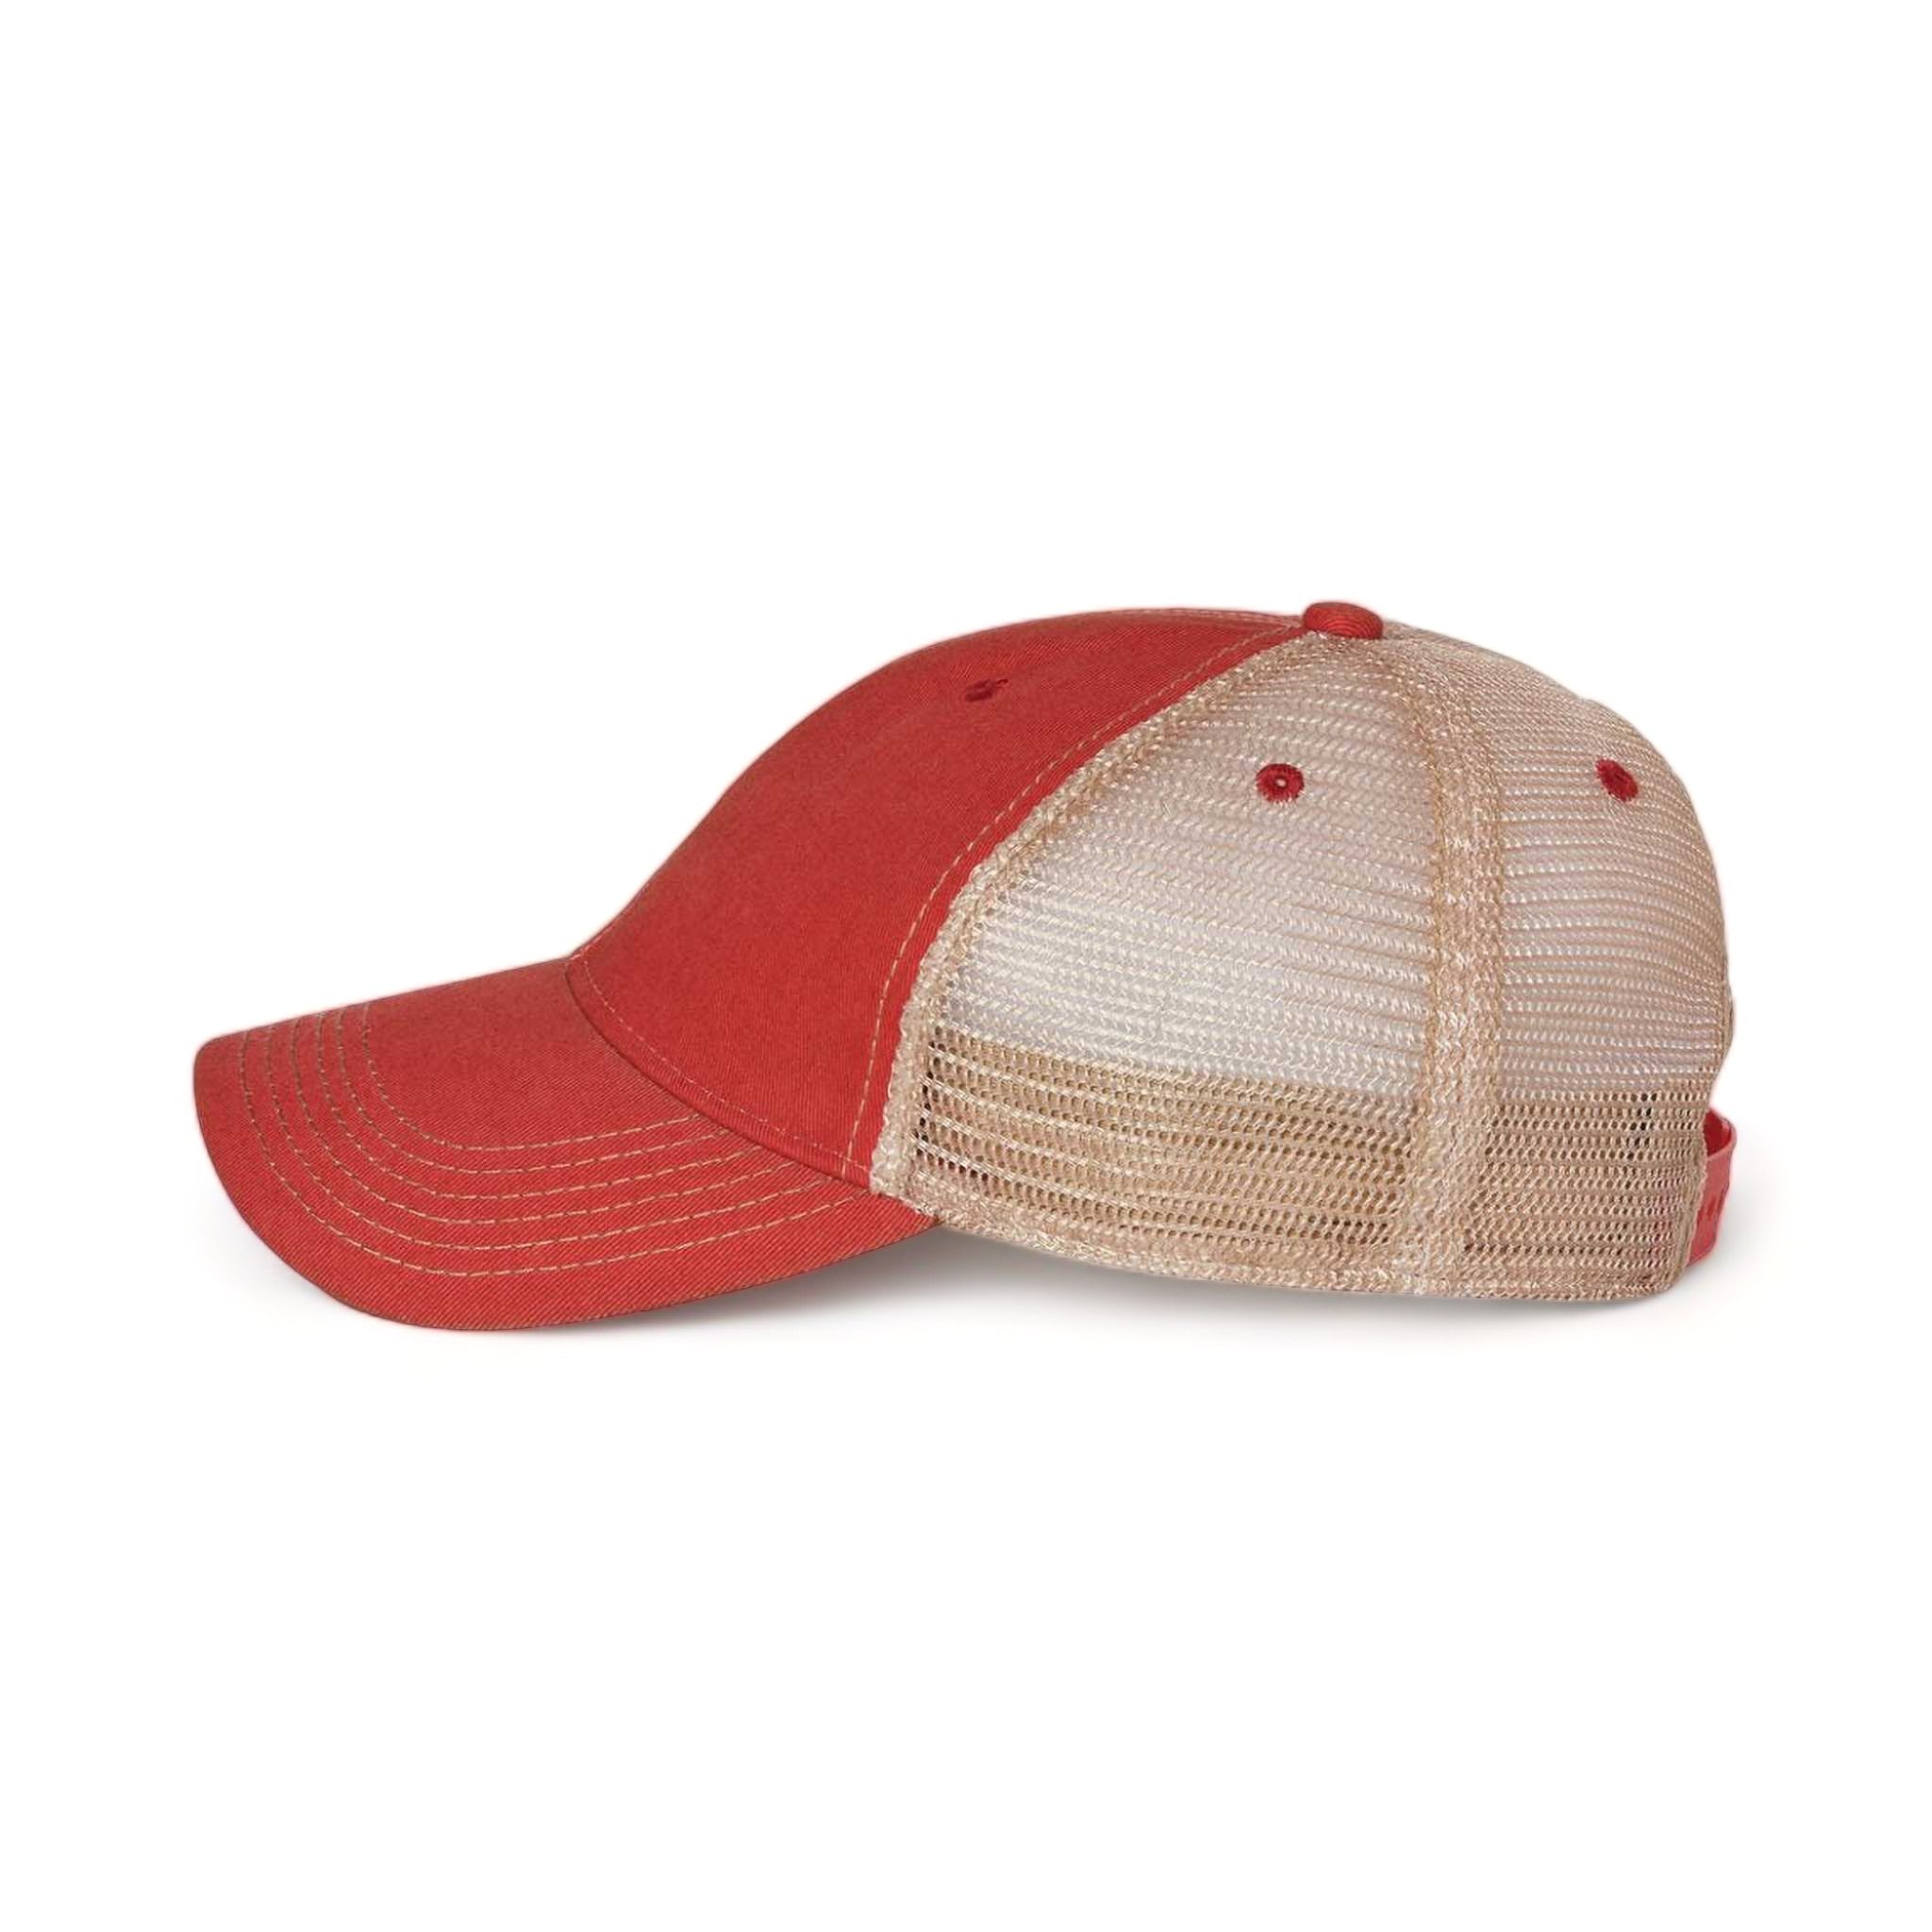 Side view of LEGACY OFA custom hat in scarlet red and khaki